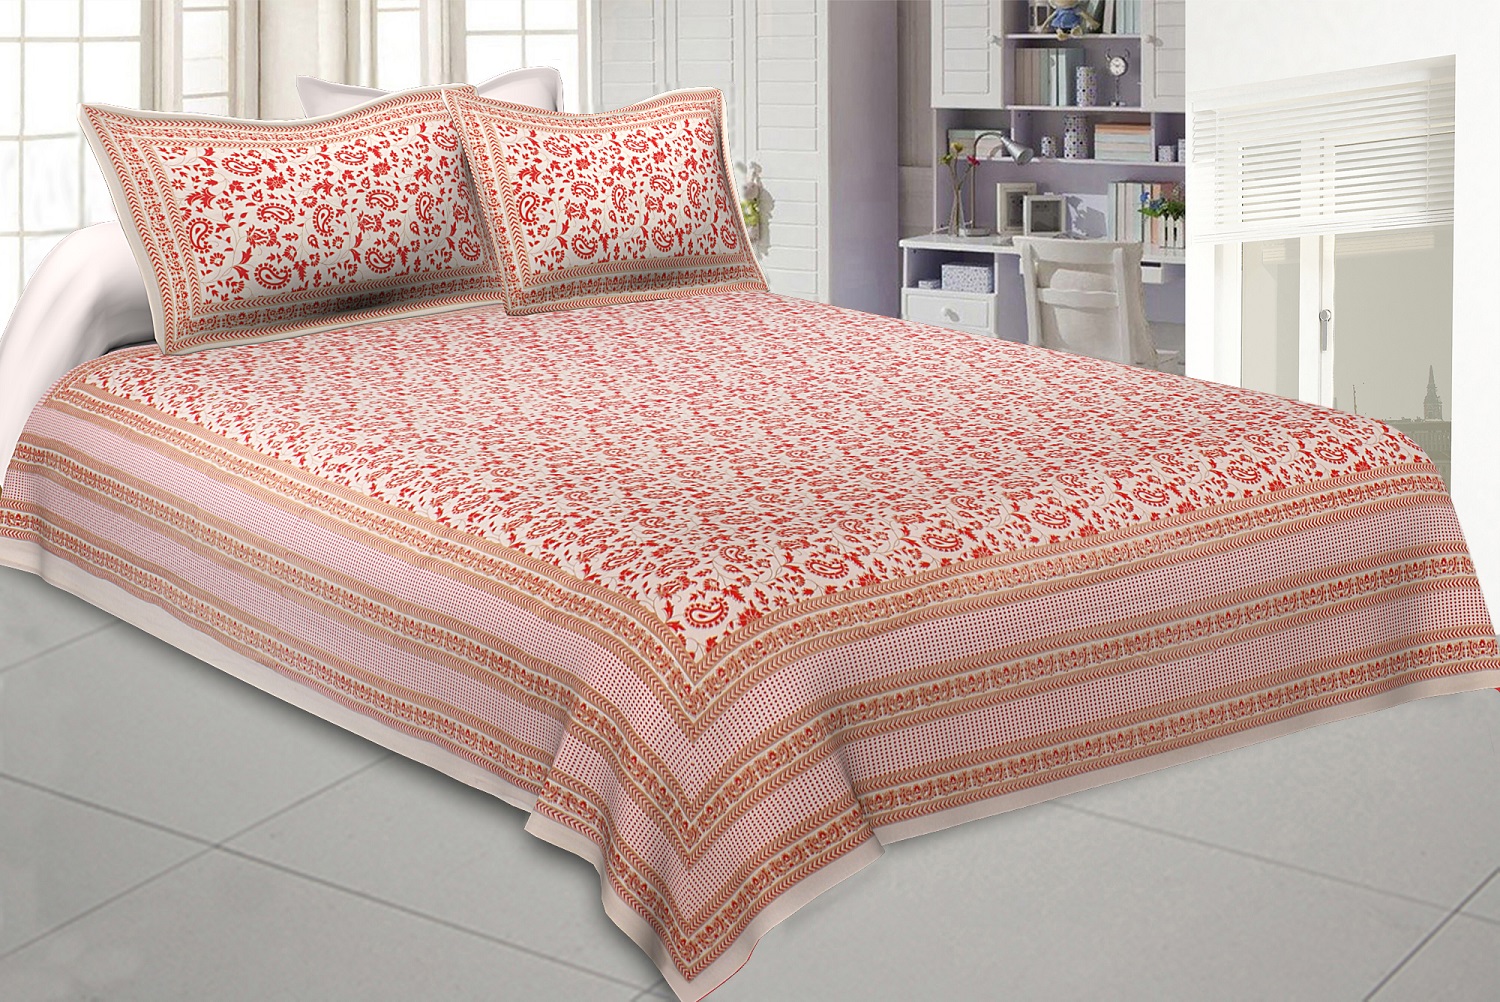 Ethnic Gold Pink Floral Double Bedsheet